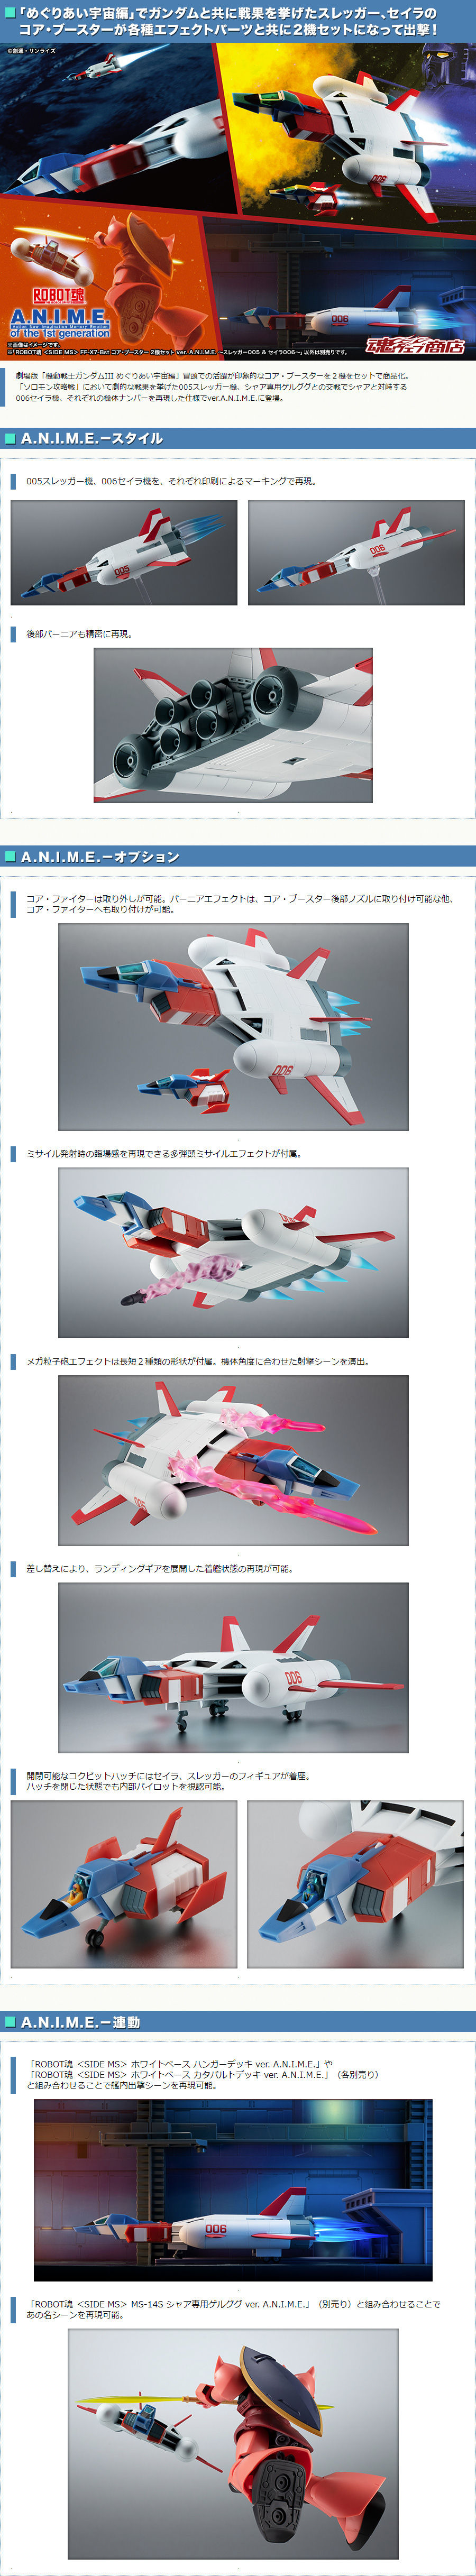 ROBOT魂 ＜SIDE MS＞ FF-X7-Bst コア・ブースター 2機セット ver 